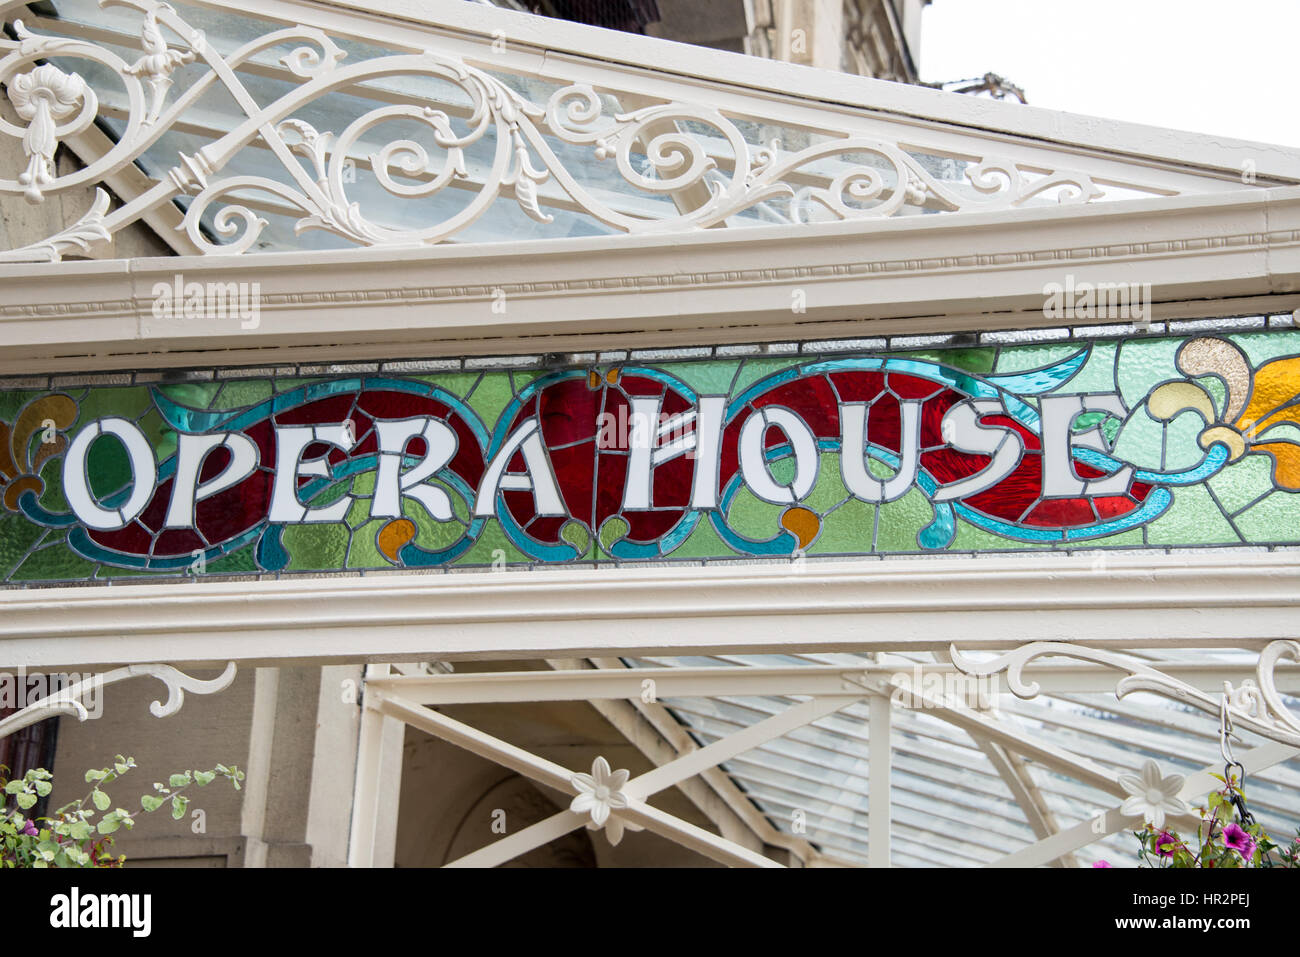 The stained glass signage on the front of Buxton Opera House, Derbyshire, UK Stock Photo